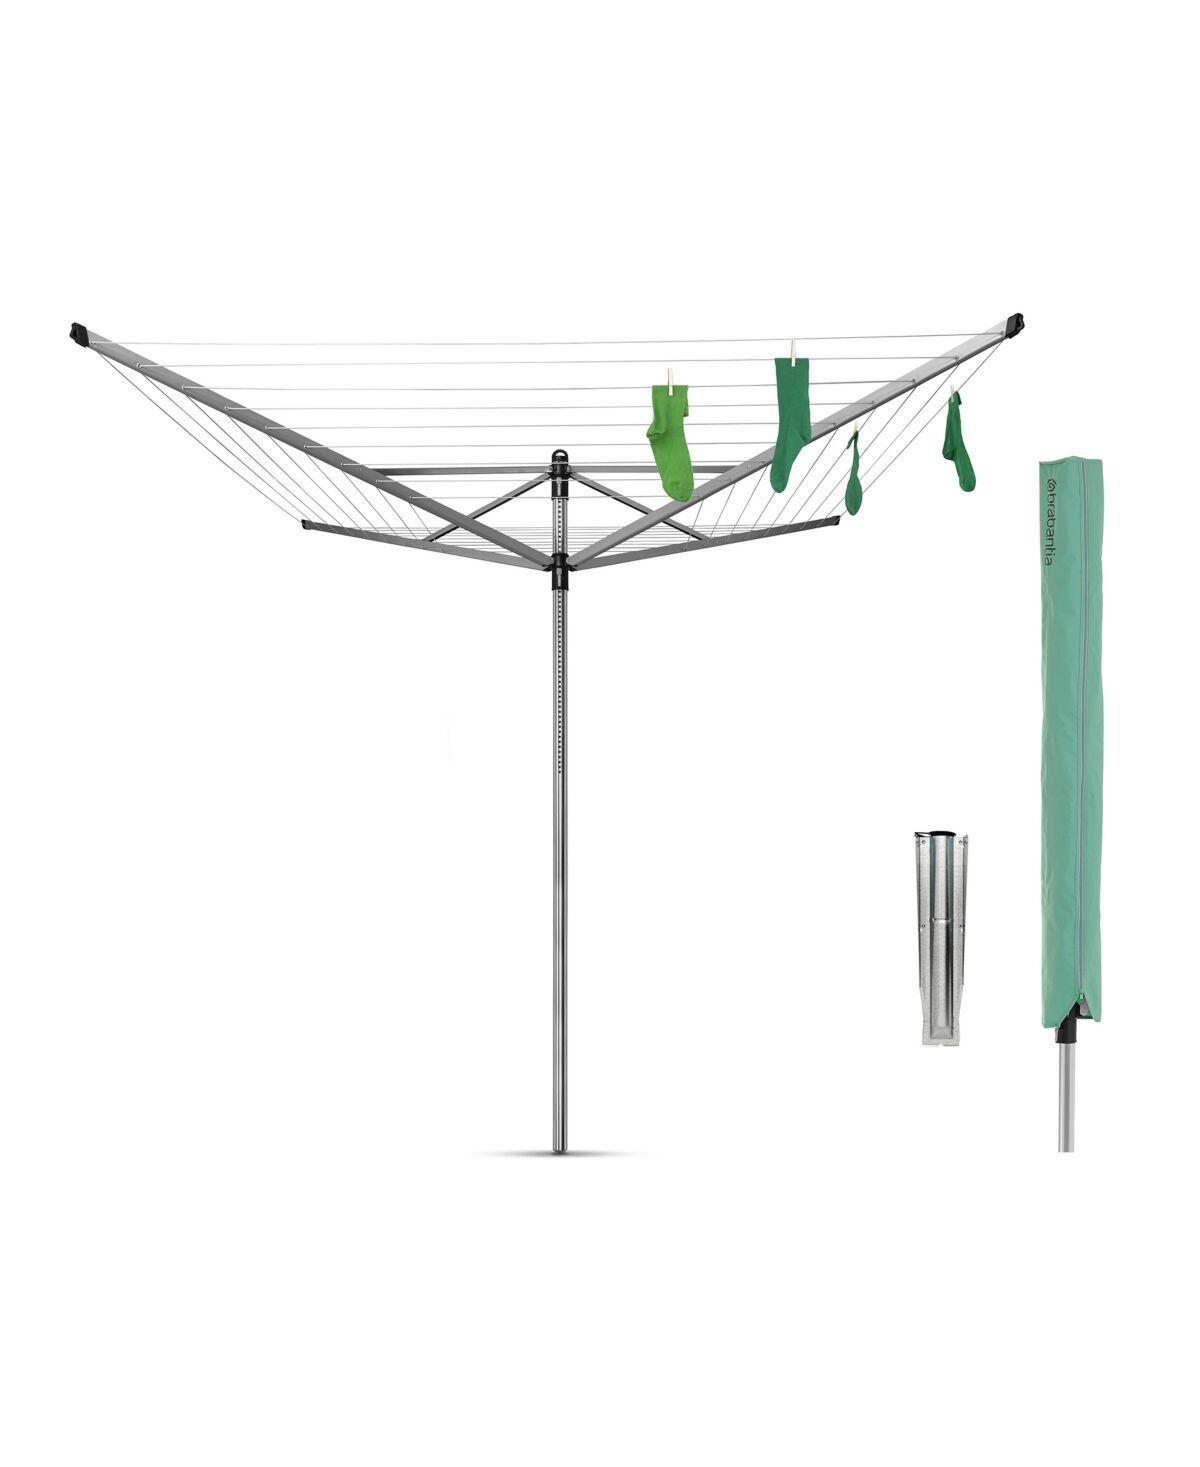 Brabantia Rotary Lift-o-Matic Clothesline - 197', 60 Meter with Metal Ground Spike and Protective Cover Set - Metallic Gray